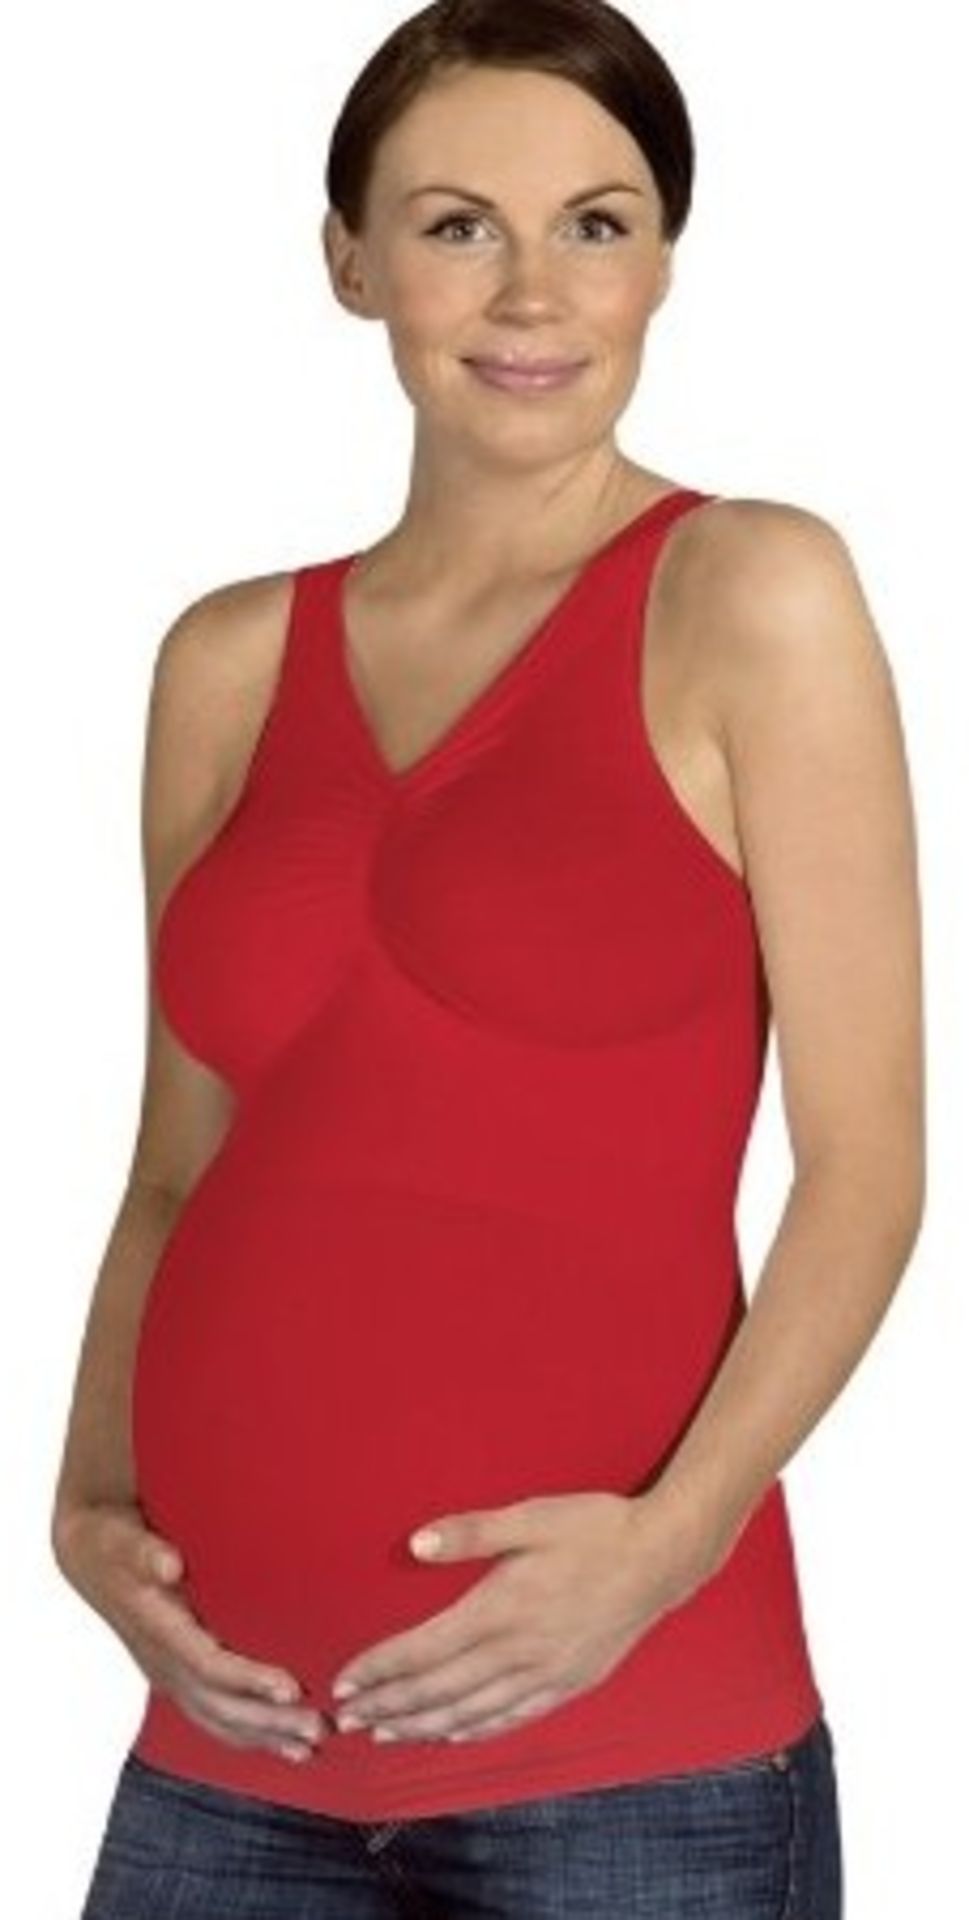 Brand New Carriwell Maternity Light Support Cami Top (Medium, Red) RRP £21.99